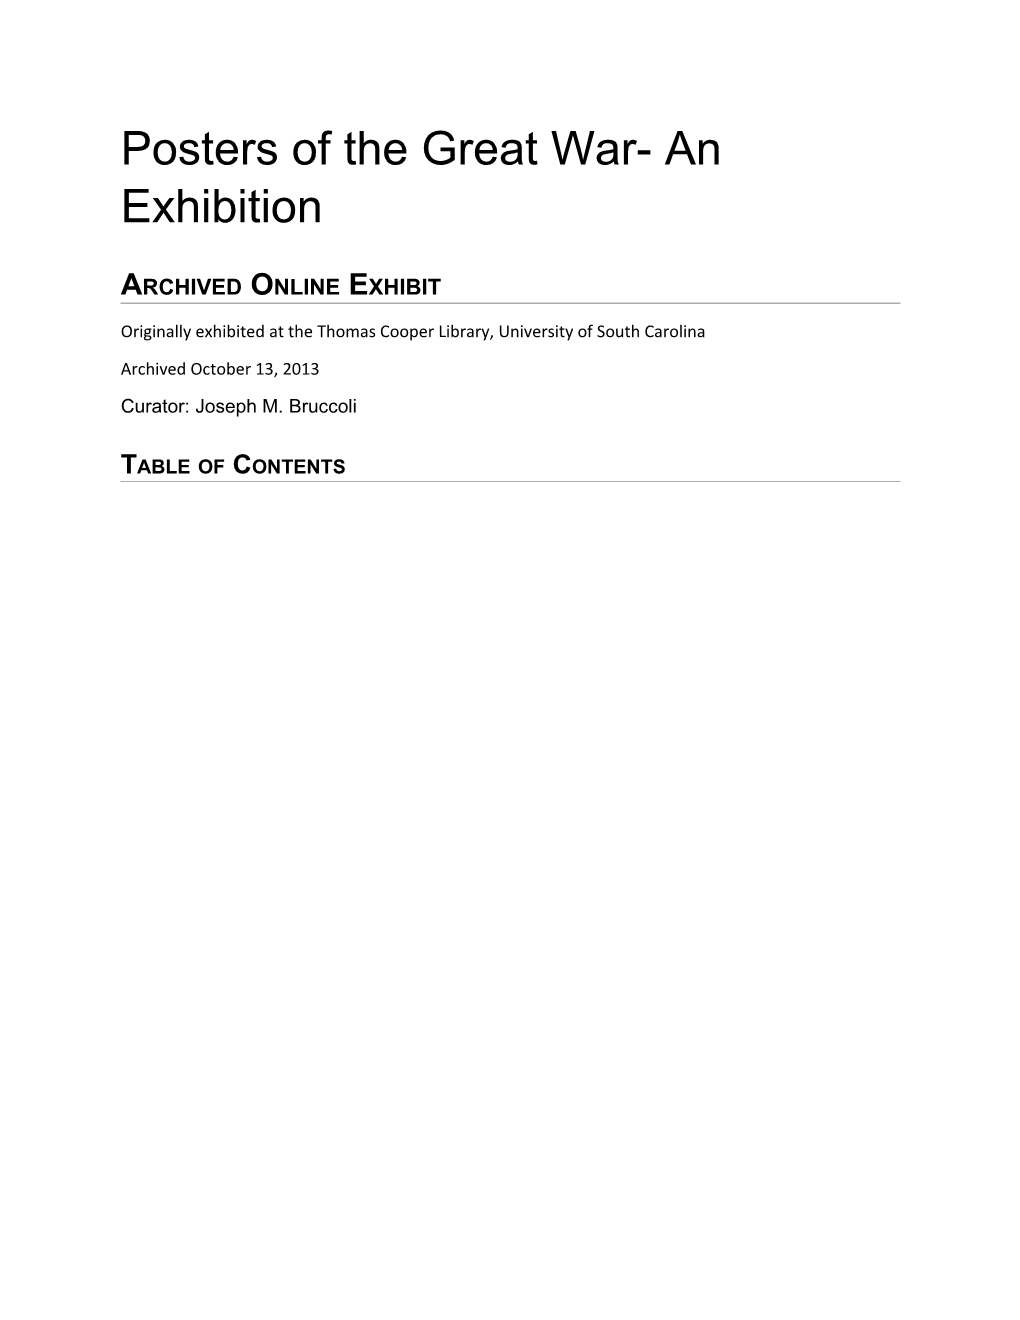 Posters of the Great War- an Exhibition